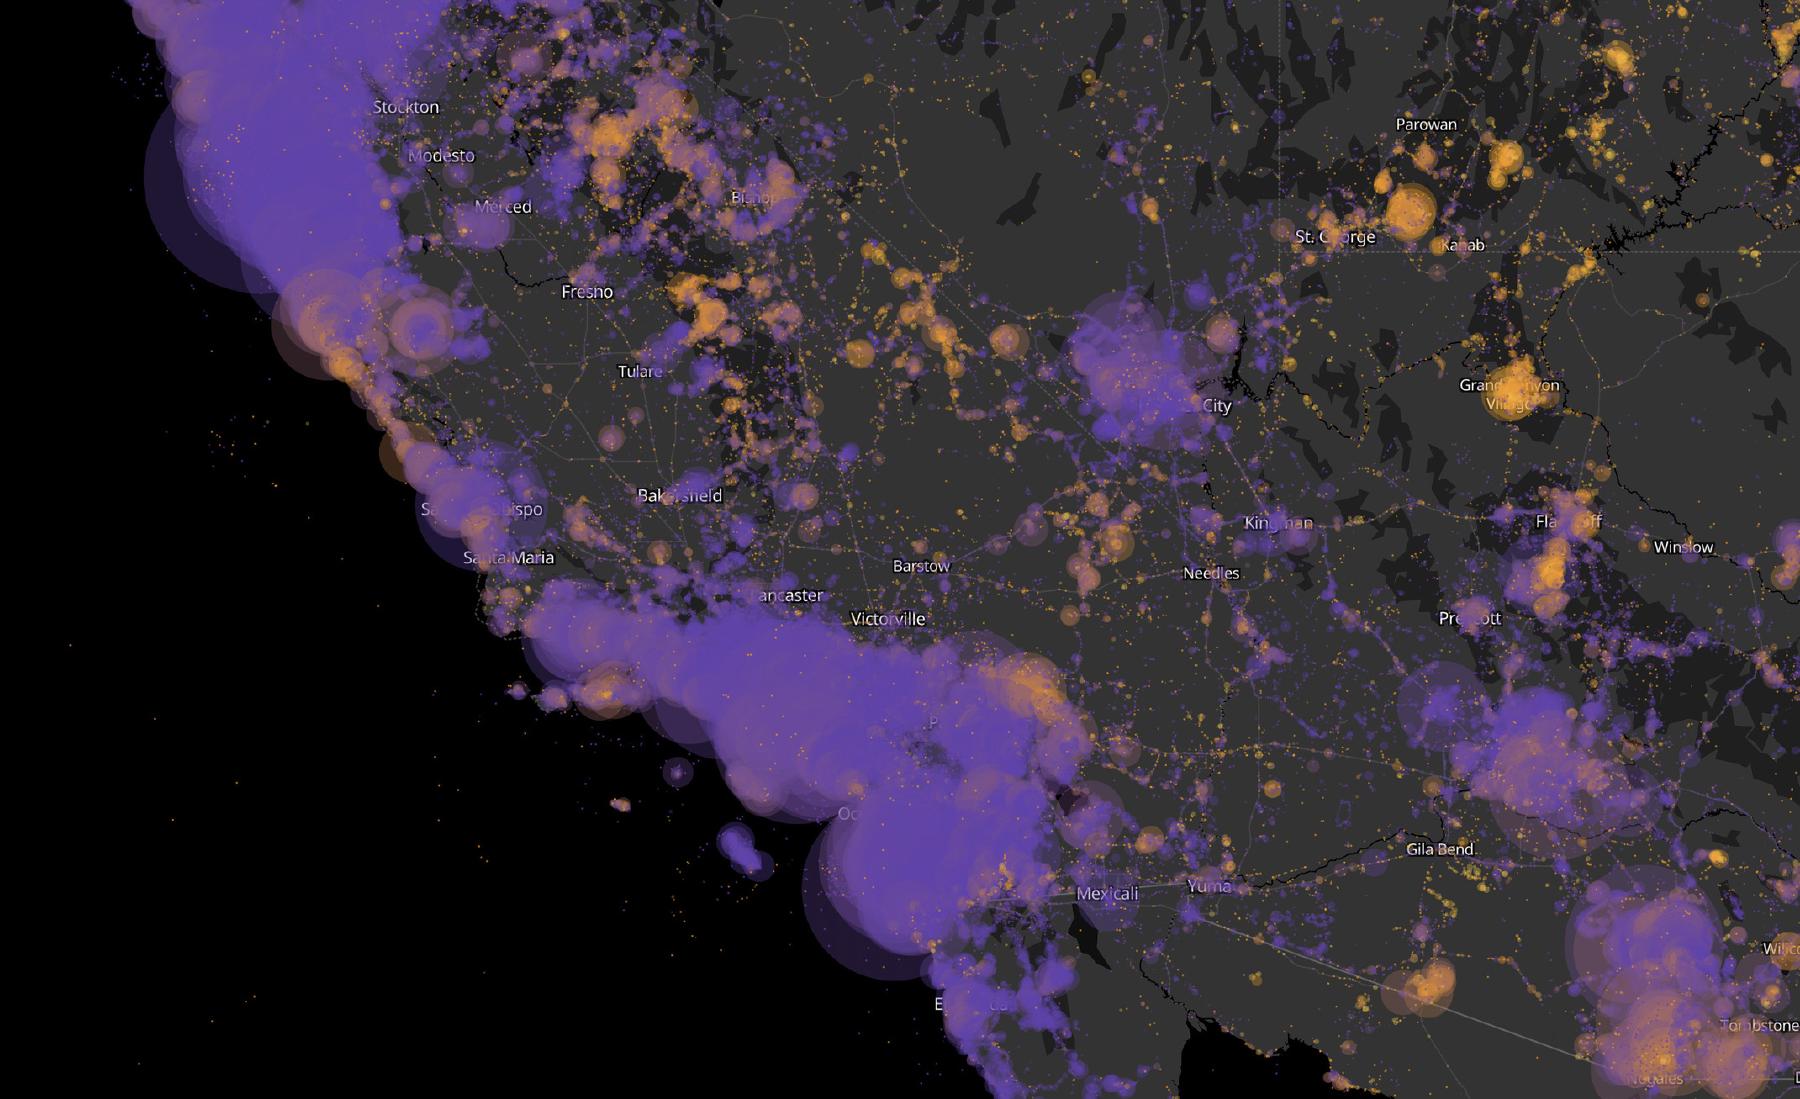 A map of iNaturalist observations in California highlighting observations by 'tourists' and 'locals'